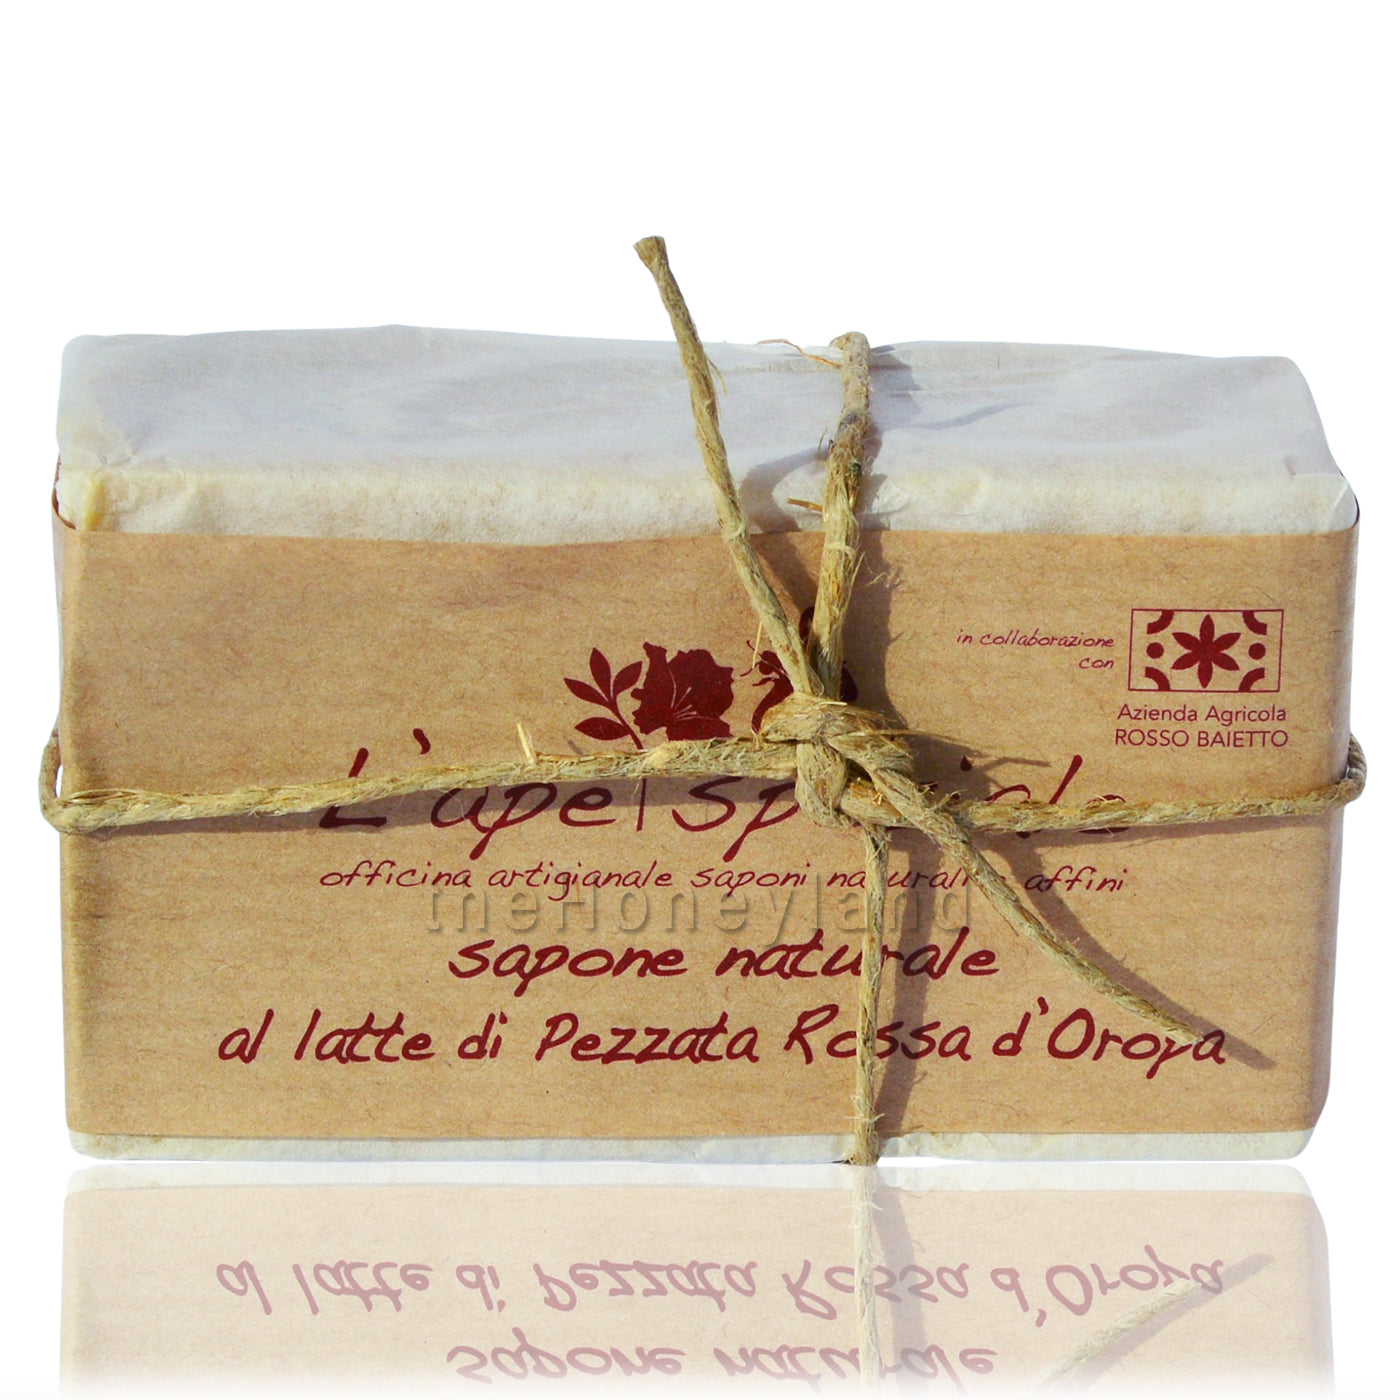 Soap with Cow Milk from Pezzata Rossa d'Oropa (Italy)